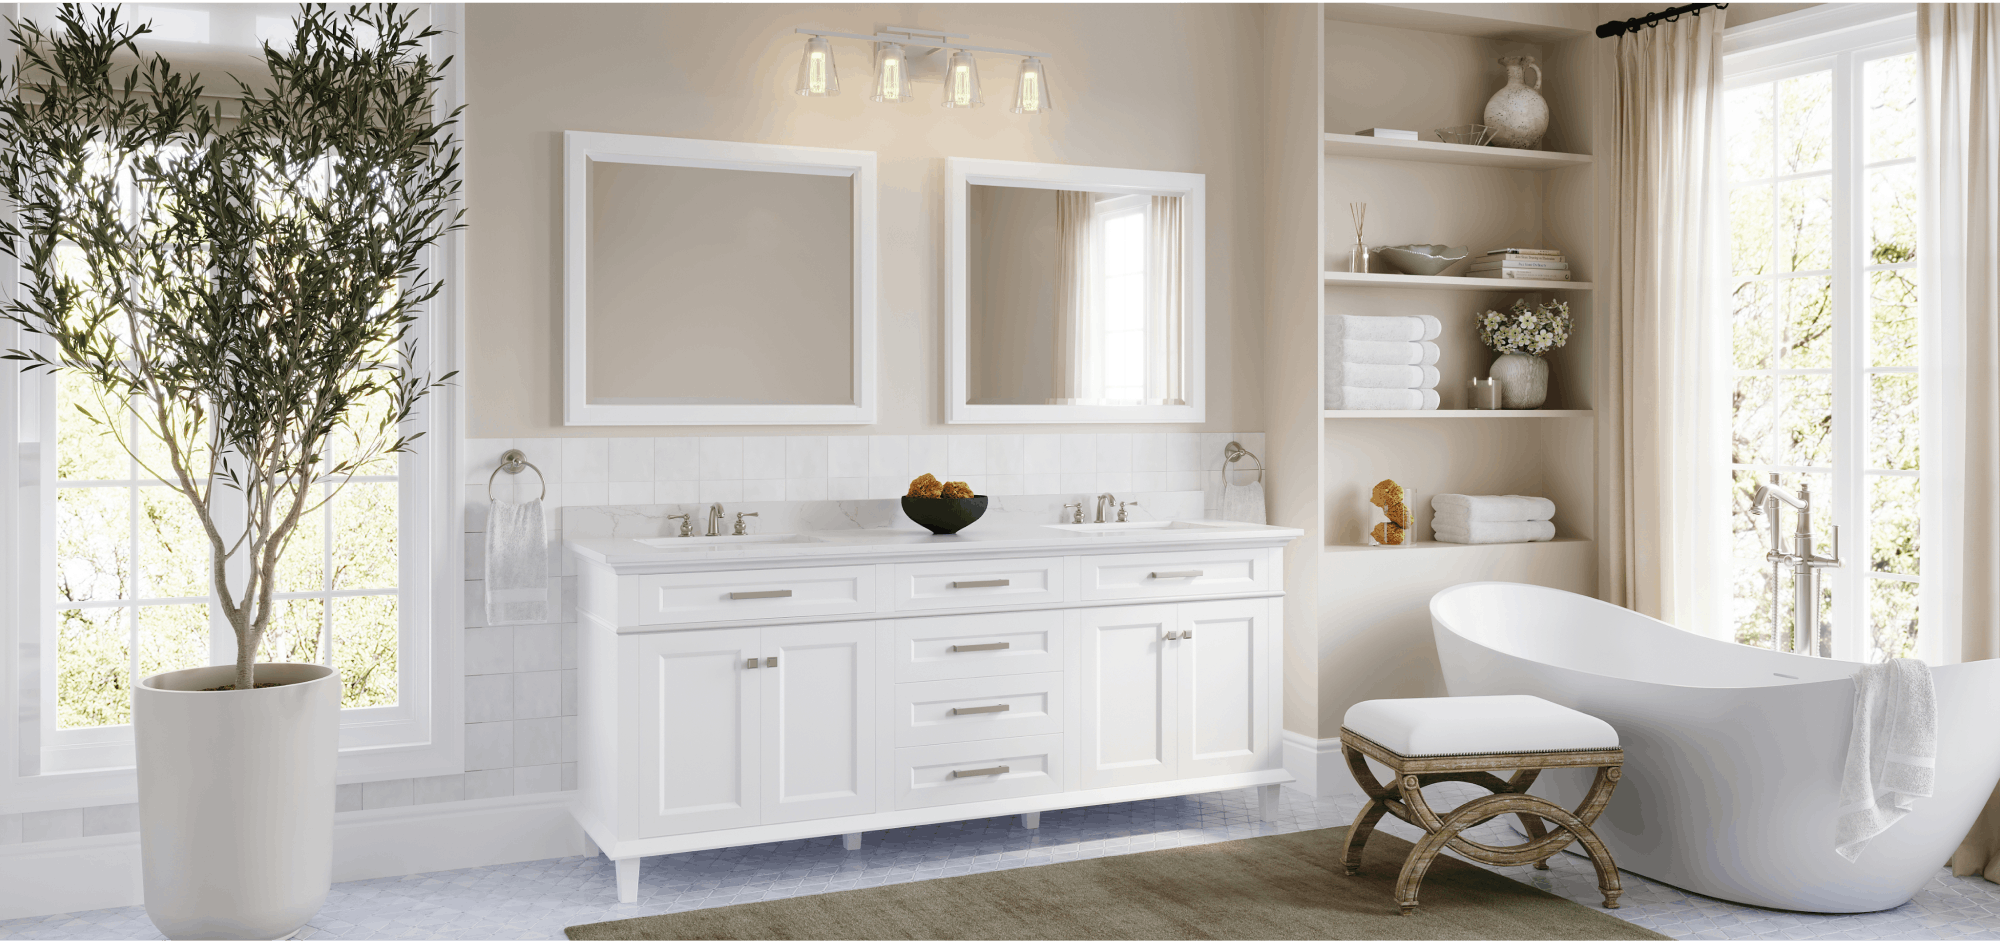 How to Choose a Bathroom Vanity: A Step-by-Step Buying Guide